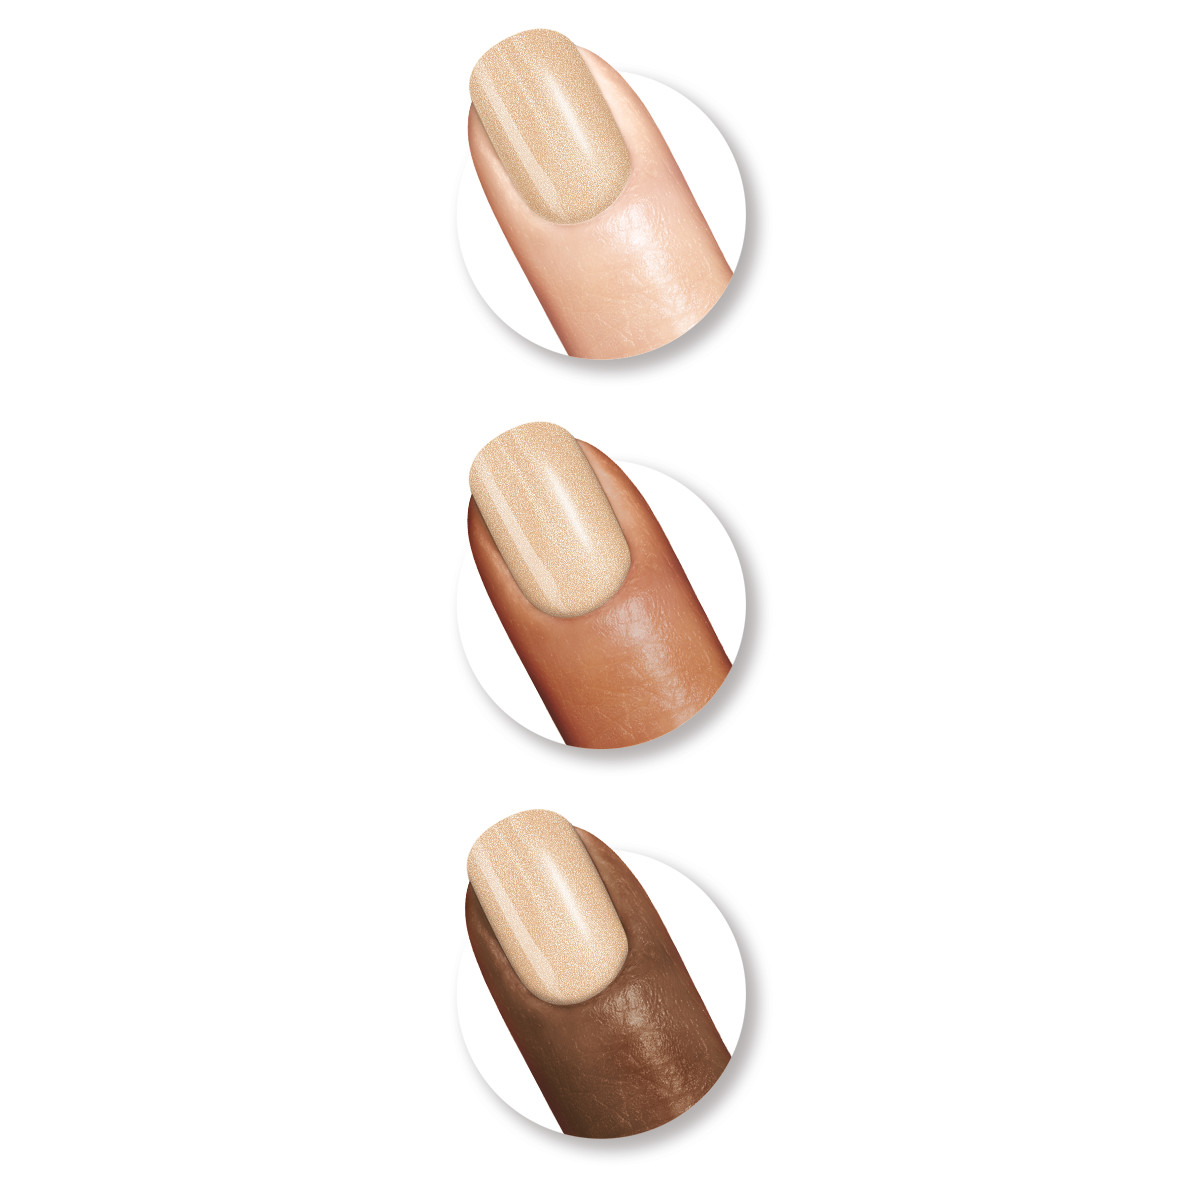 Sally Hansen Complete Salon Manicure Nail Color, You Glow, Girl! - image 2 of 2